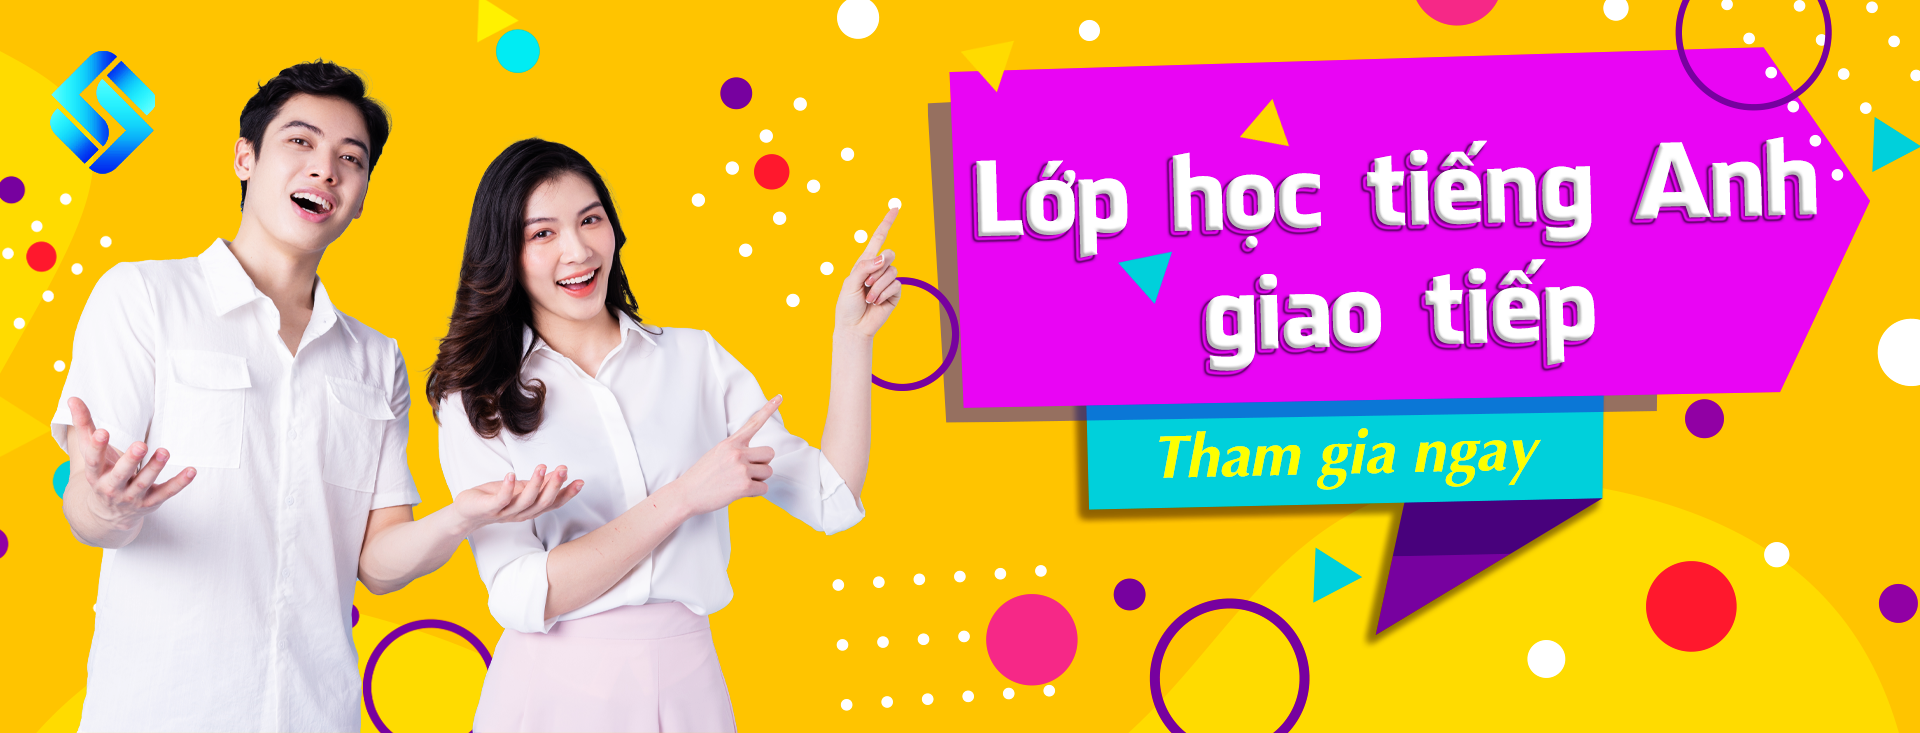  Lớp học tiếng Anh giao tiếp 